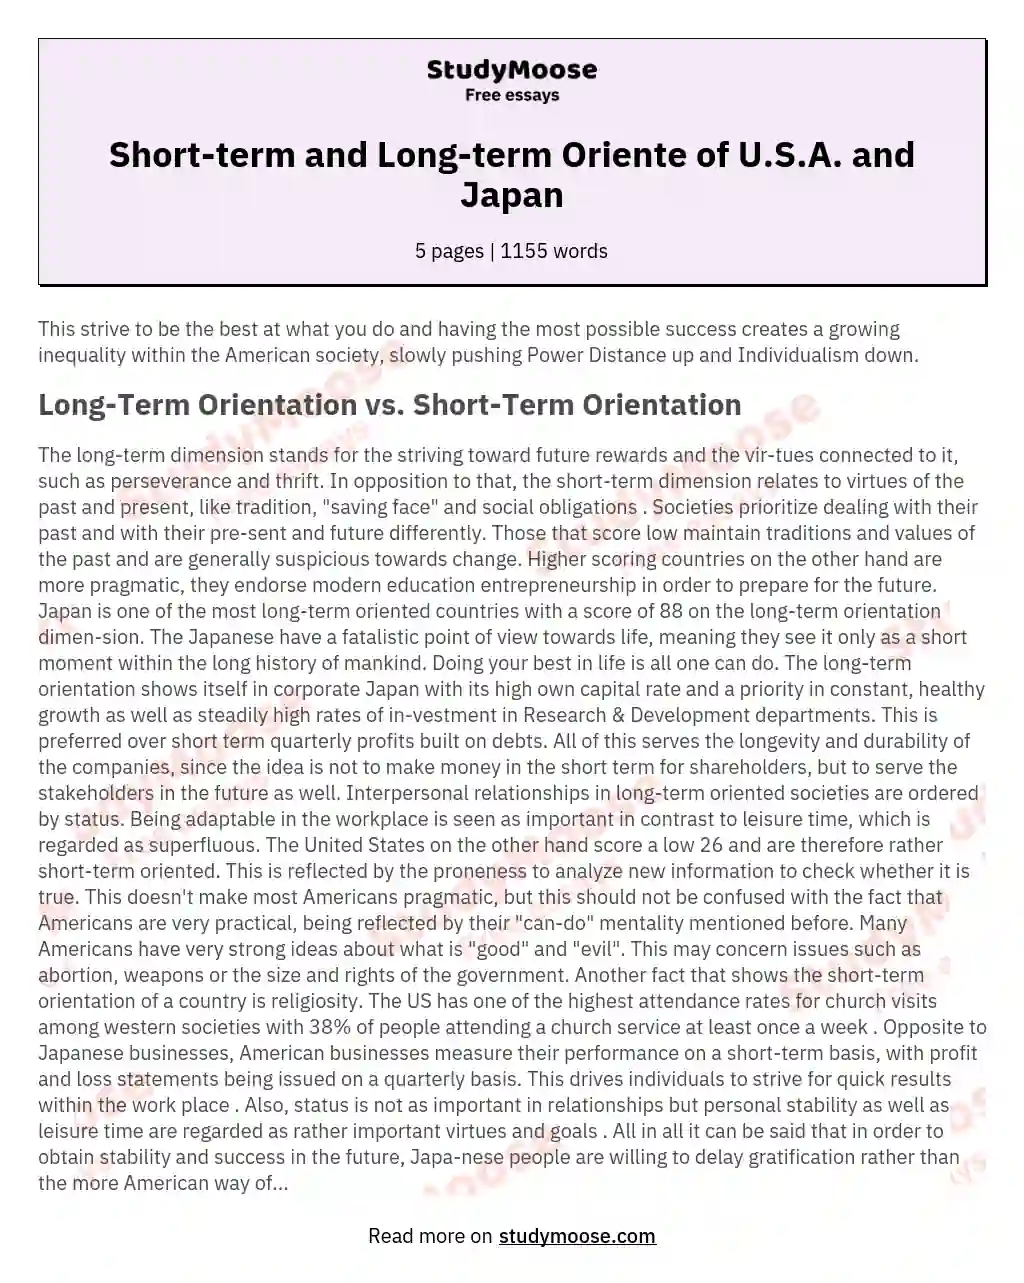 Short-term and Long-term Oriente of U.S.A. and Japan essay